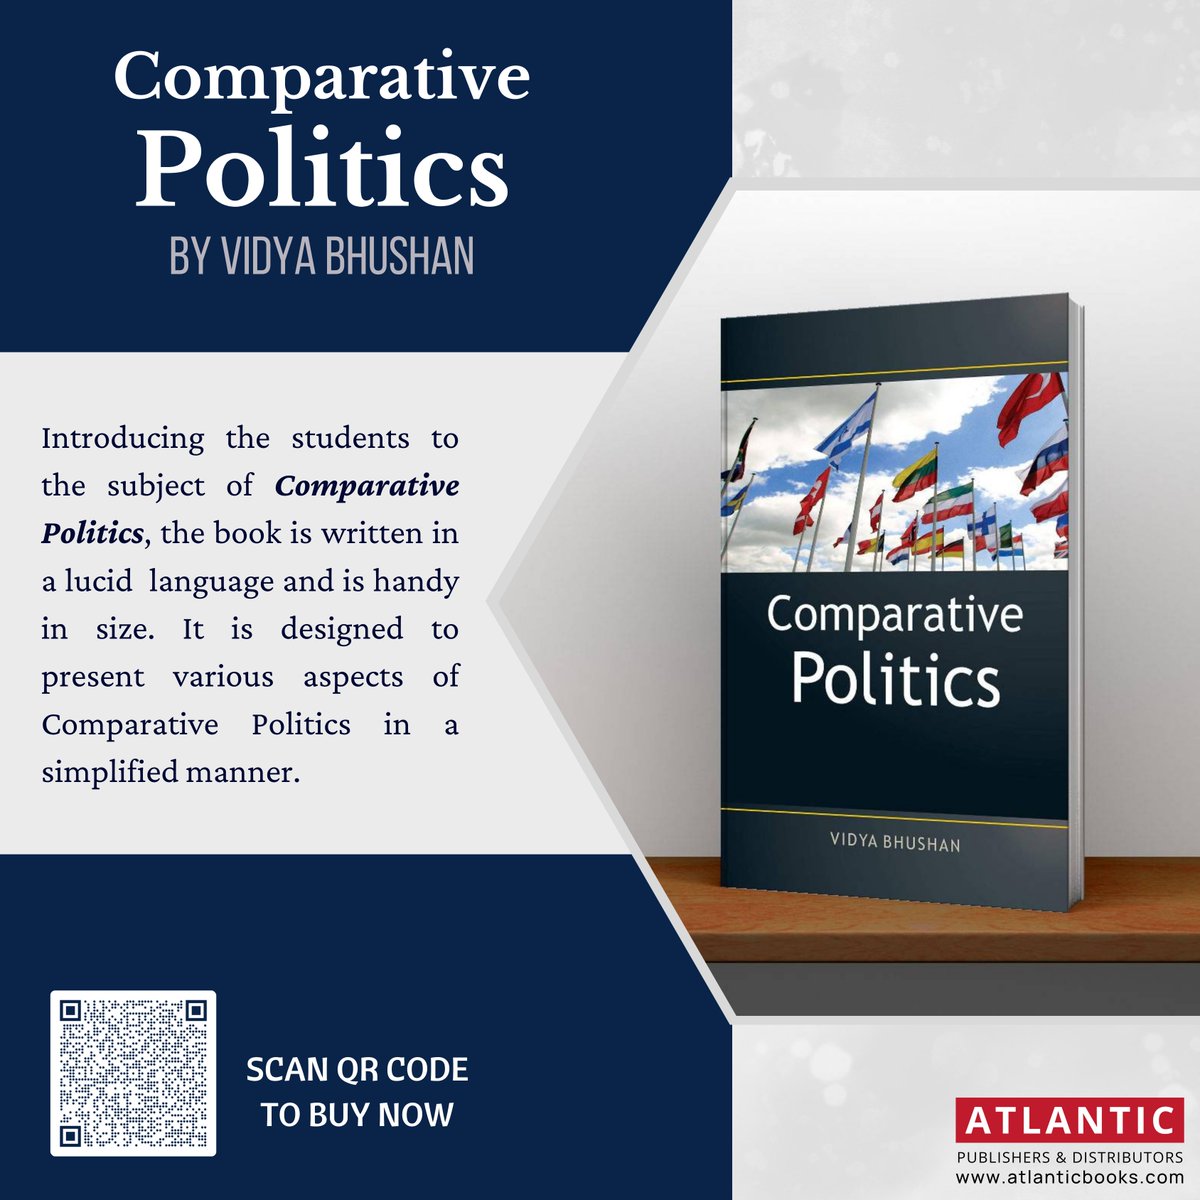 📚Navigating the intriguing realm of #ComparativePolitics, where ideologies shape nations and governance evolves. From #ideologies to institutions, this book ignites insights into our world's political intricacies.🌍📖
#GlobalGovernance #InsightfulReading #Politicalideologies